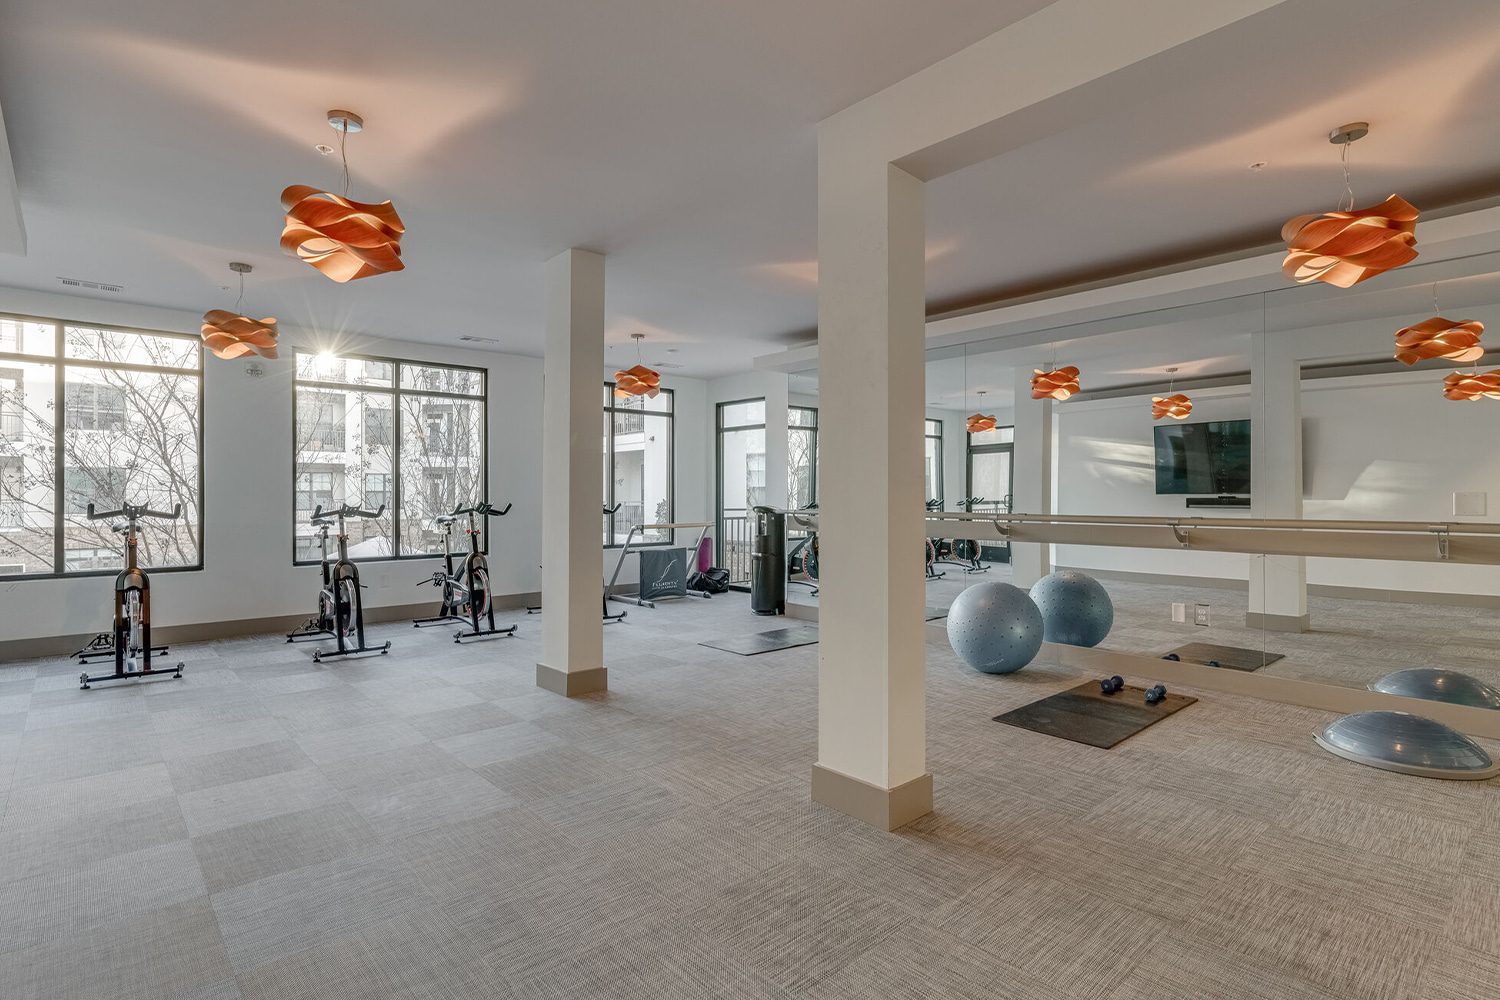 Avalon at Seven Springs - Interior Gym Area